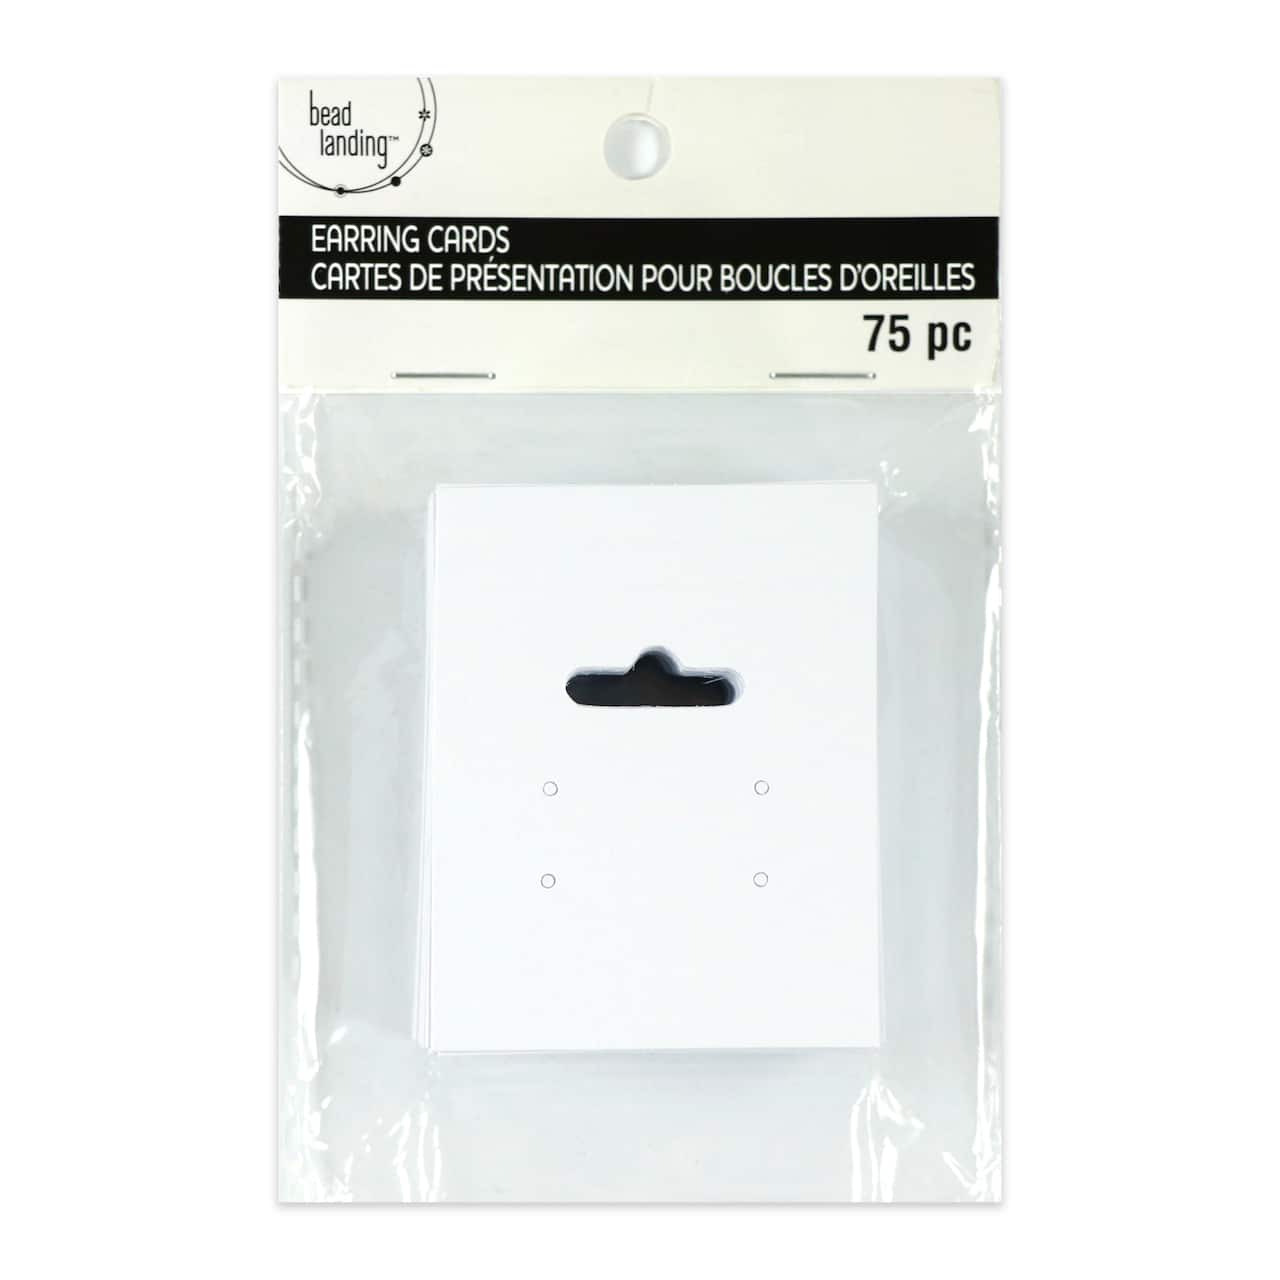 12 Packs: 75 ct. (900 total) White Paper Earring Cards by Bead Landing&#x2122;